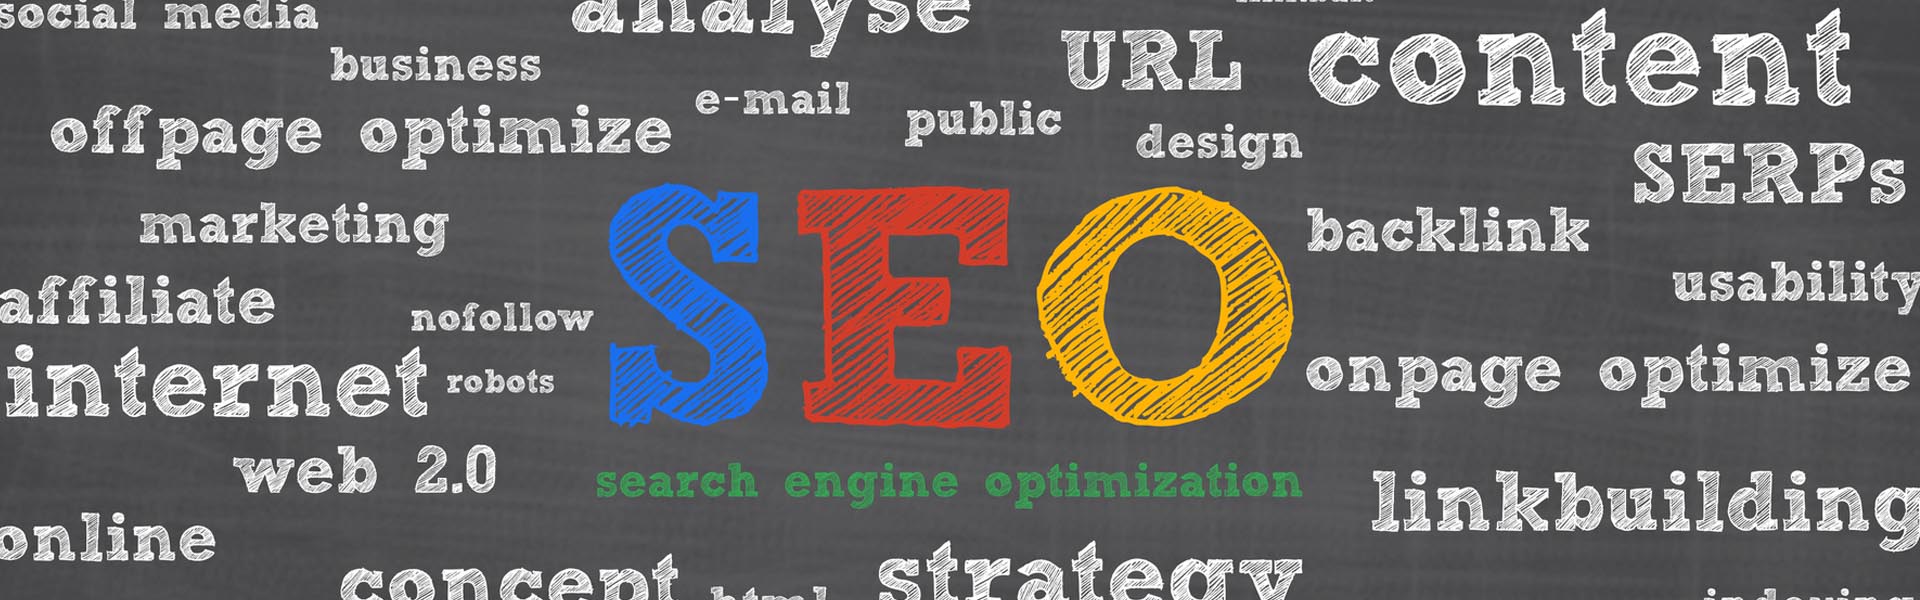 Learn more about SEO